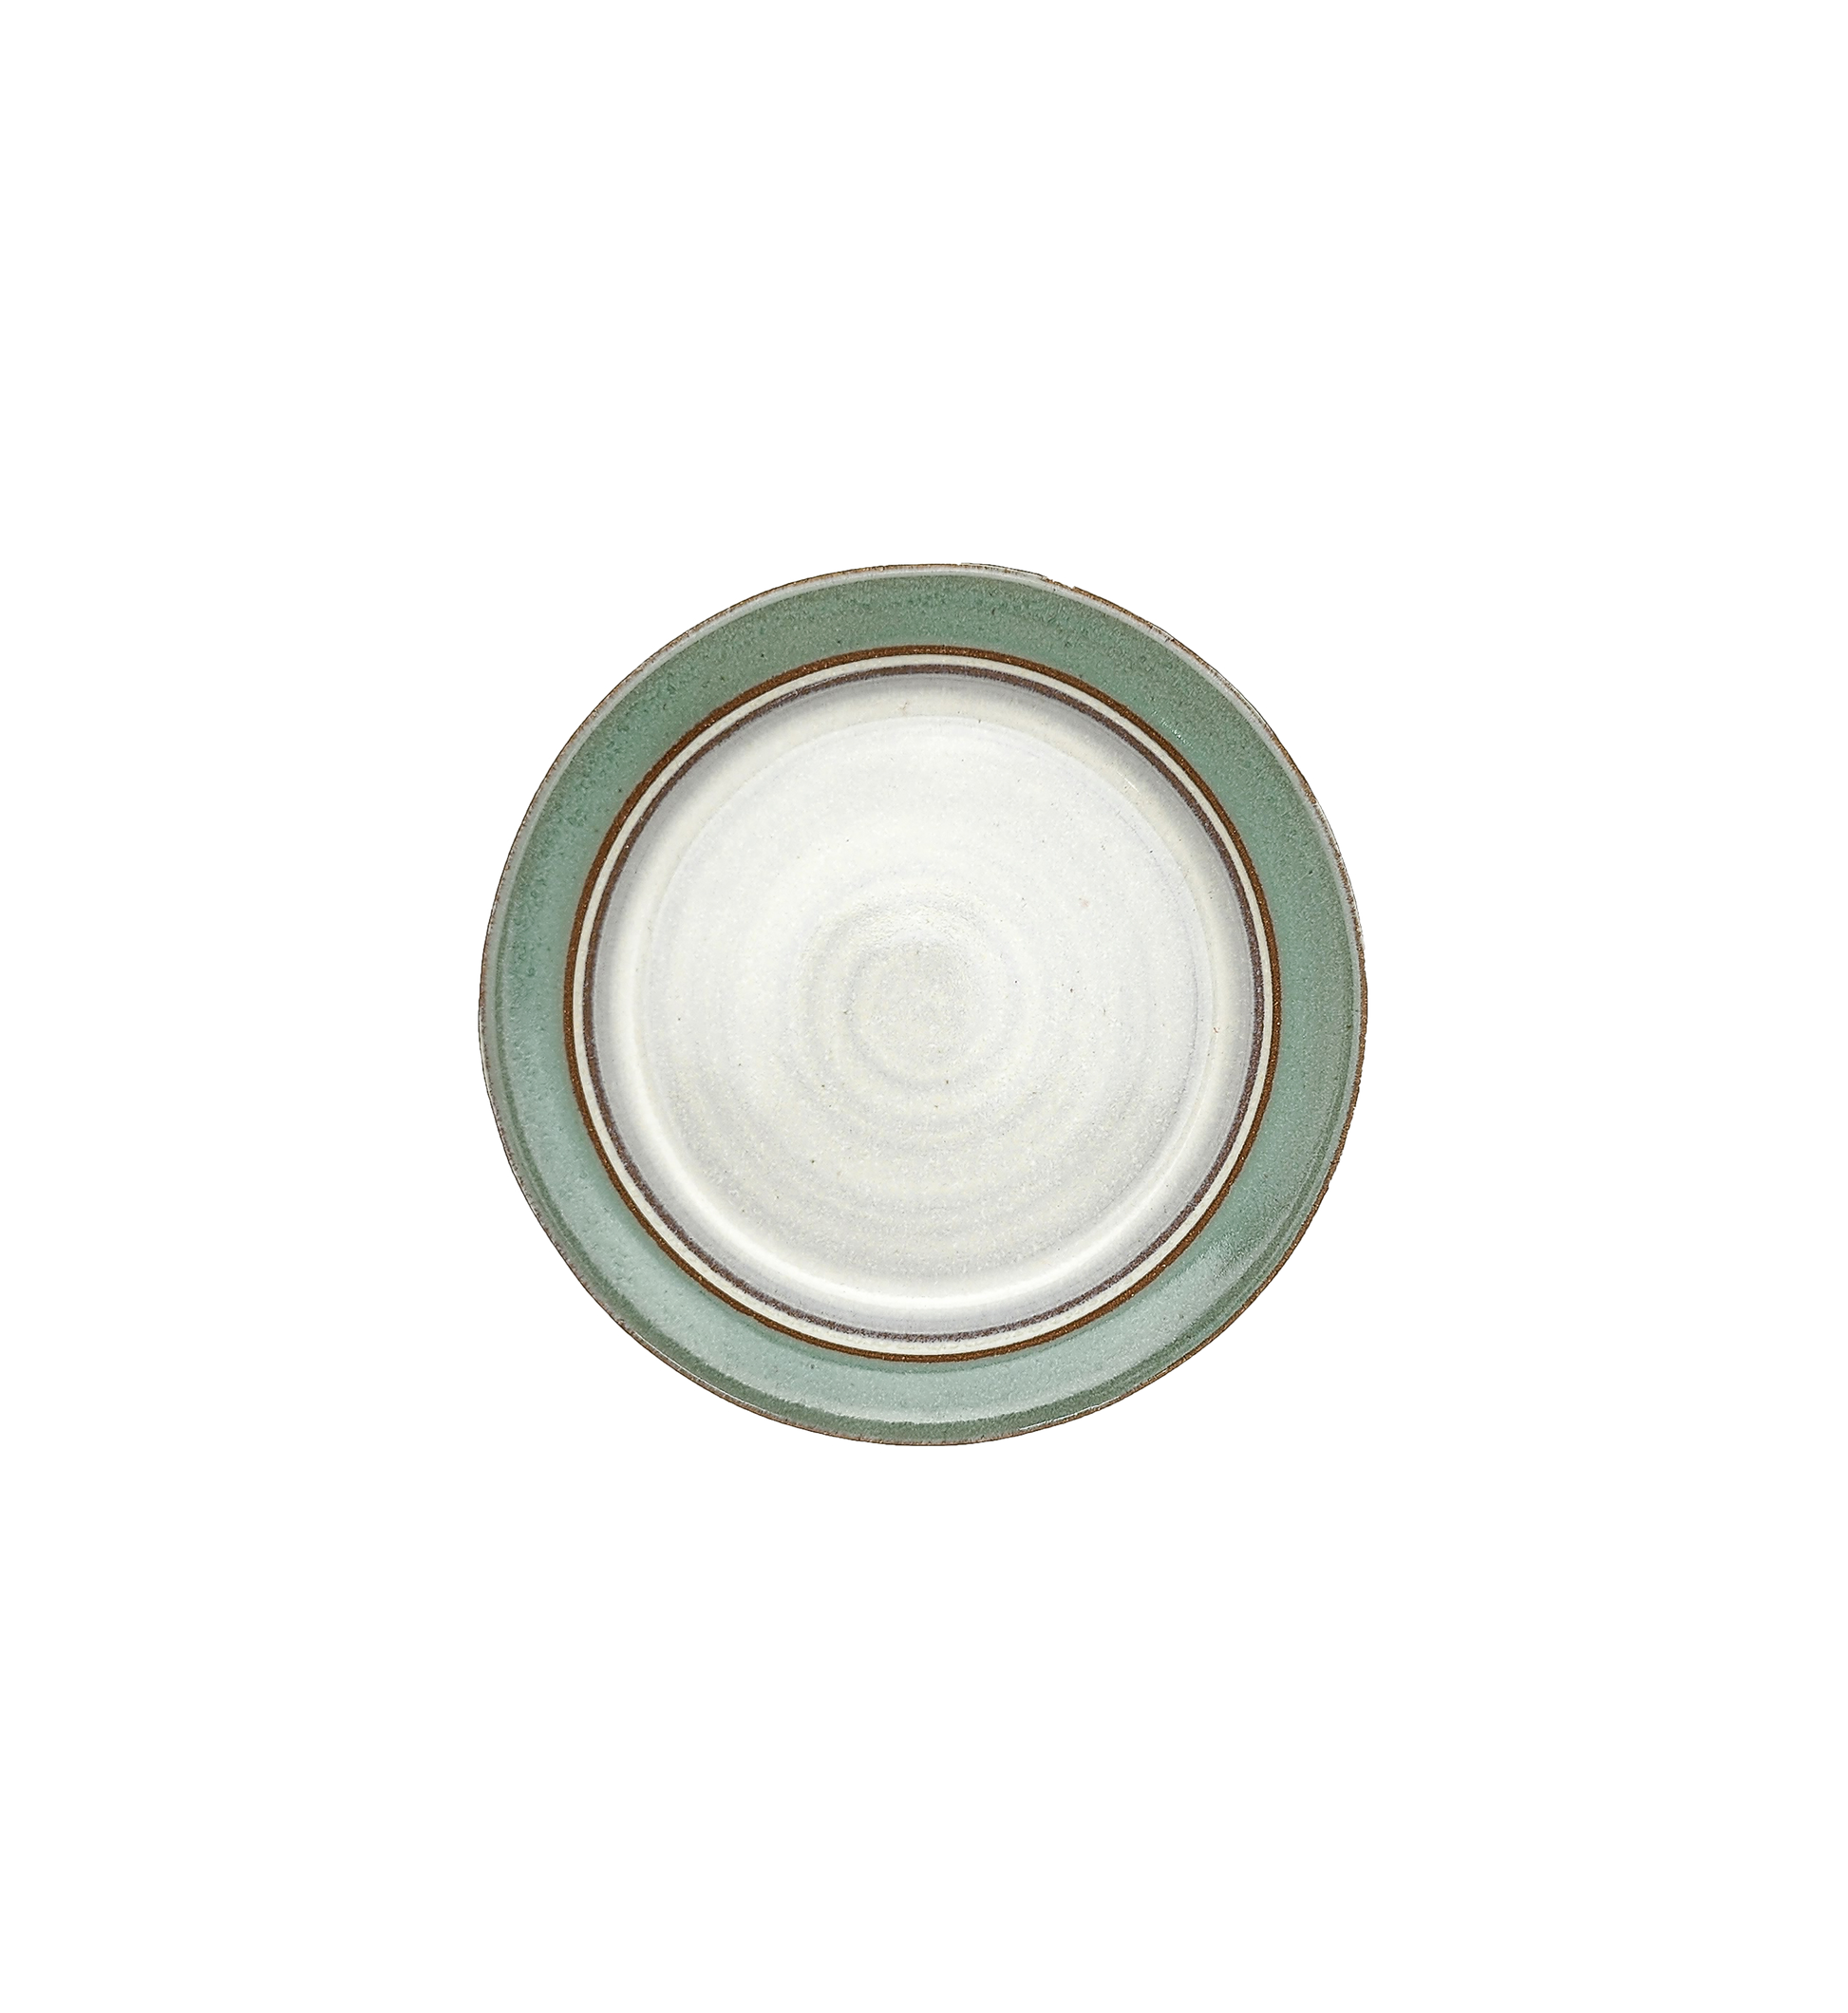 Image Description for Dessert Plate (6.5") in Light Green: A serene light green dessert plate from Clinton Pottery's Handmade Dinnerware Collection. The 6.5-inch plate features a gentle green glaze, evoking the tranquility of a spring meadow. Its petite size makes it perfect for serving delectable desserts or small treats with a touch of natural charm and freshness.